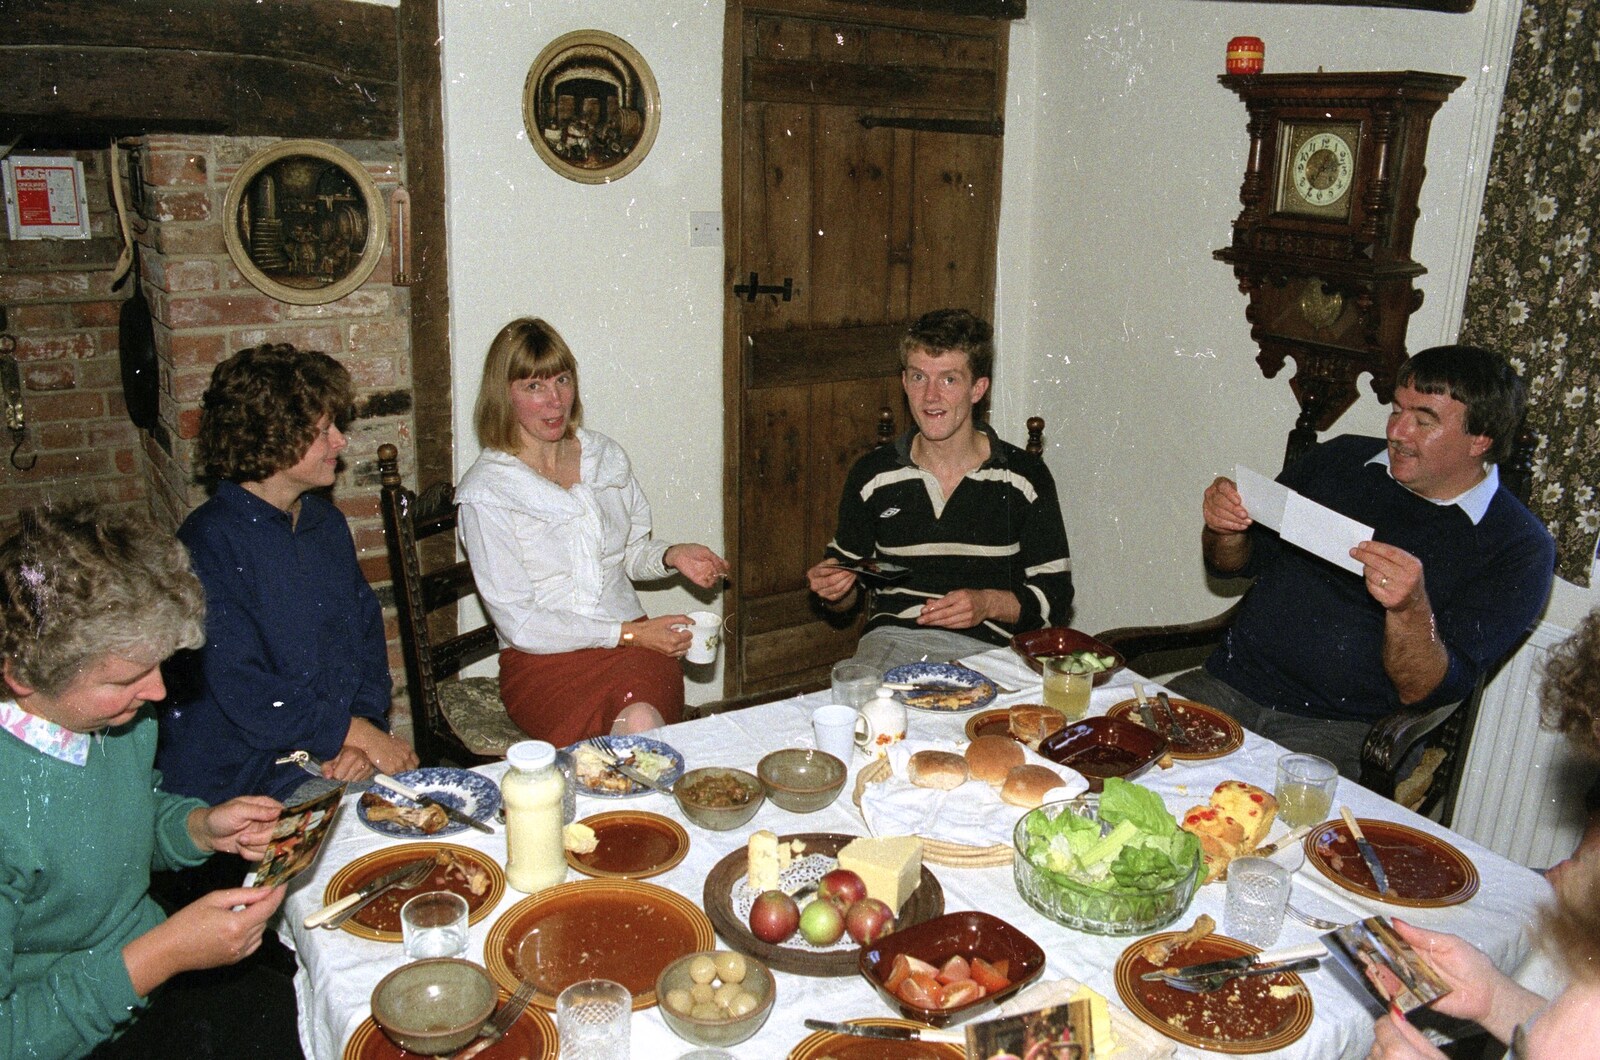 A little post-cider lunch from The Annual Cider Making Event, Stuston, Suffolk - 11th October 1990